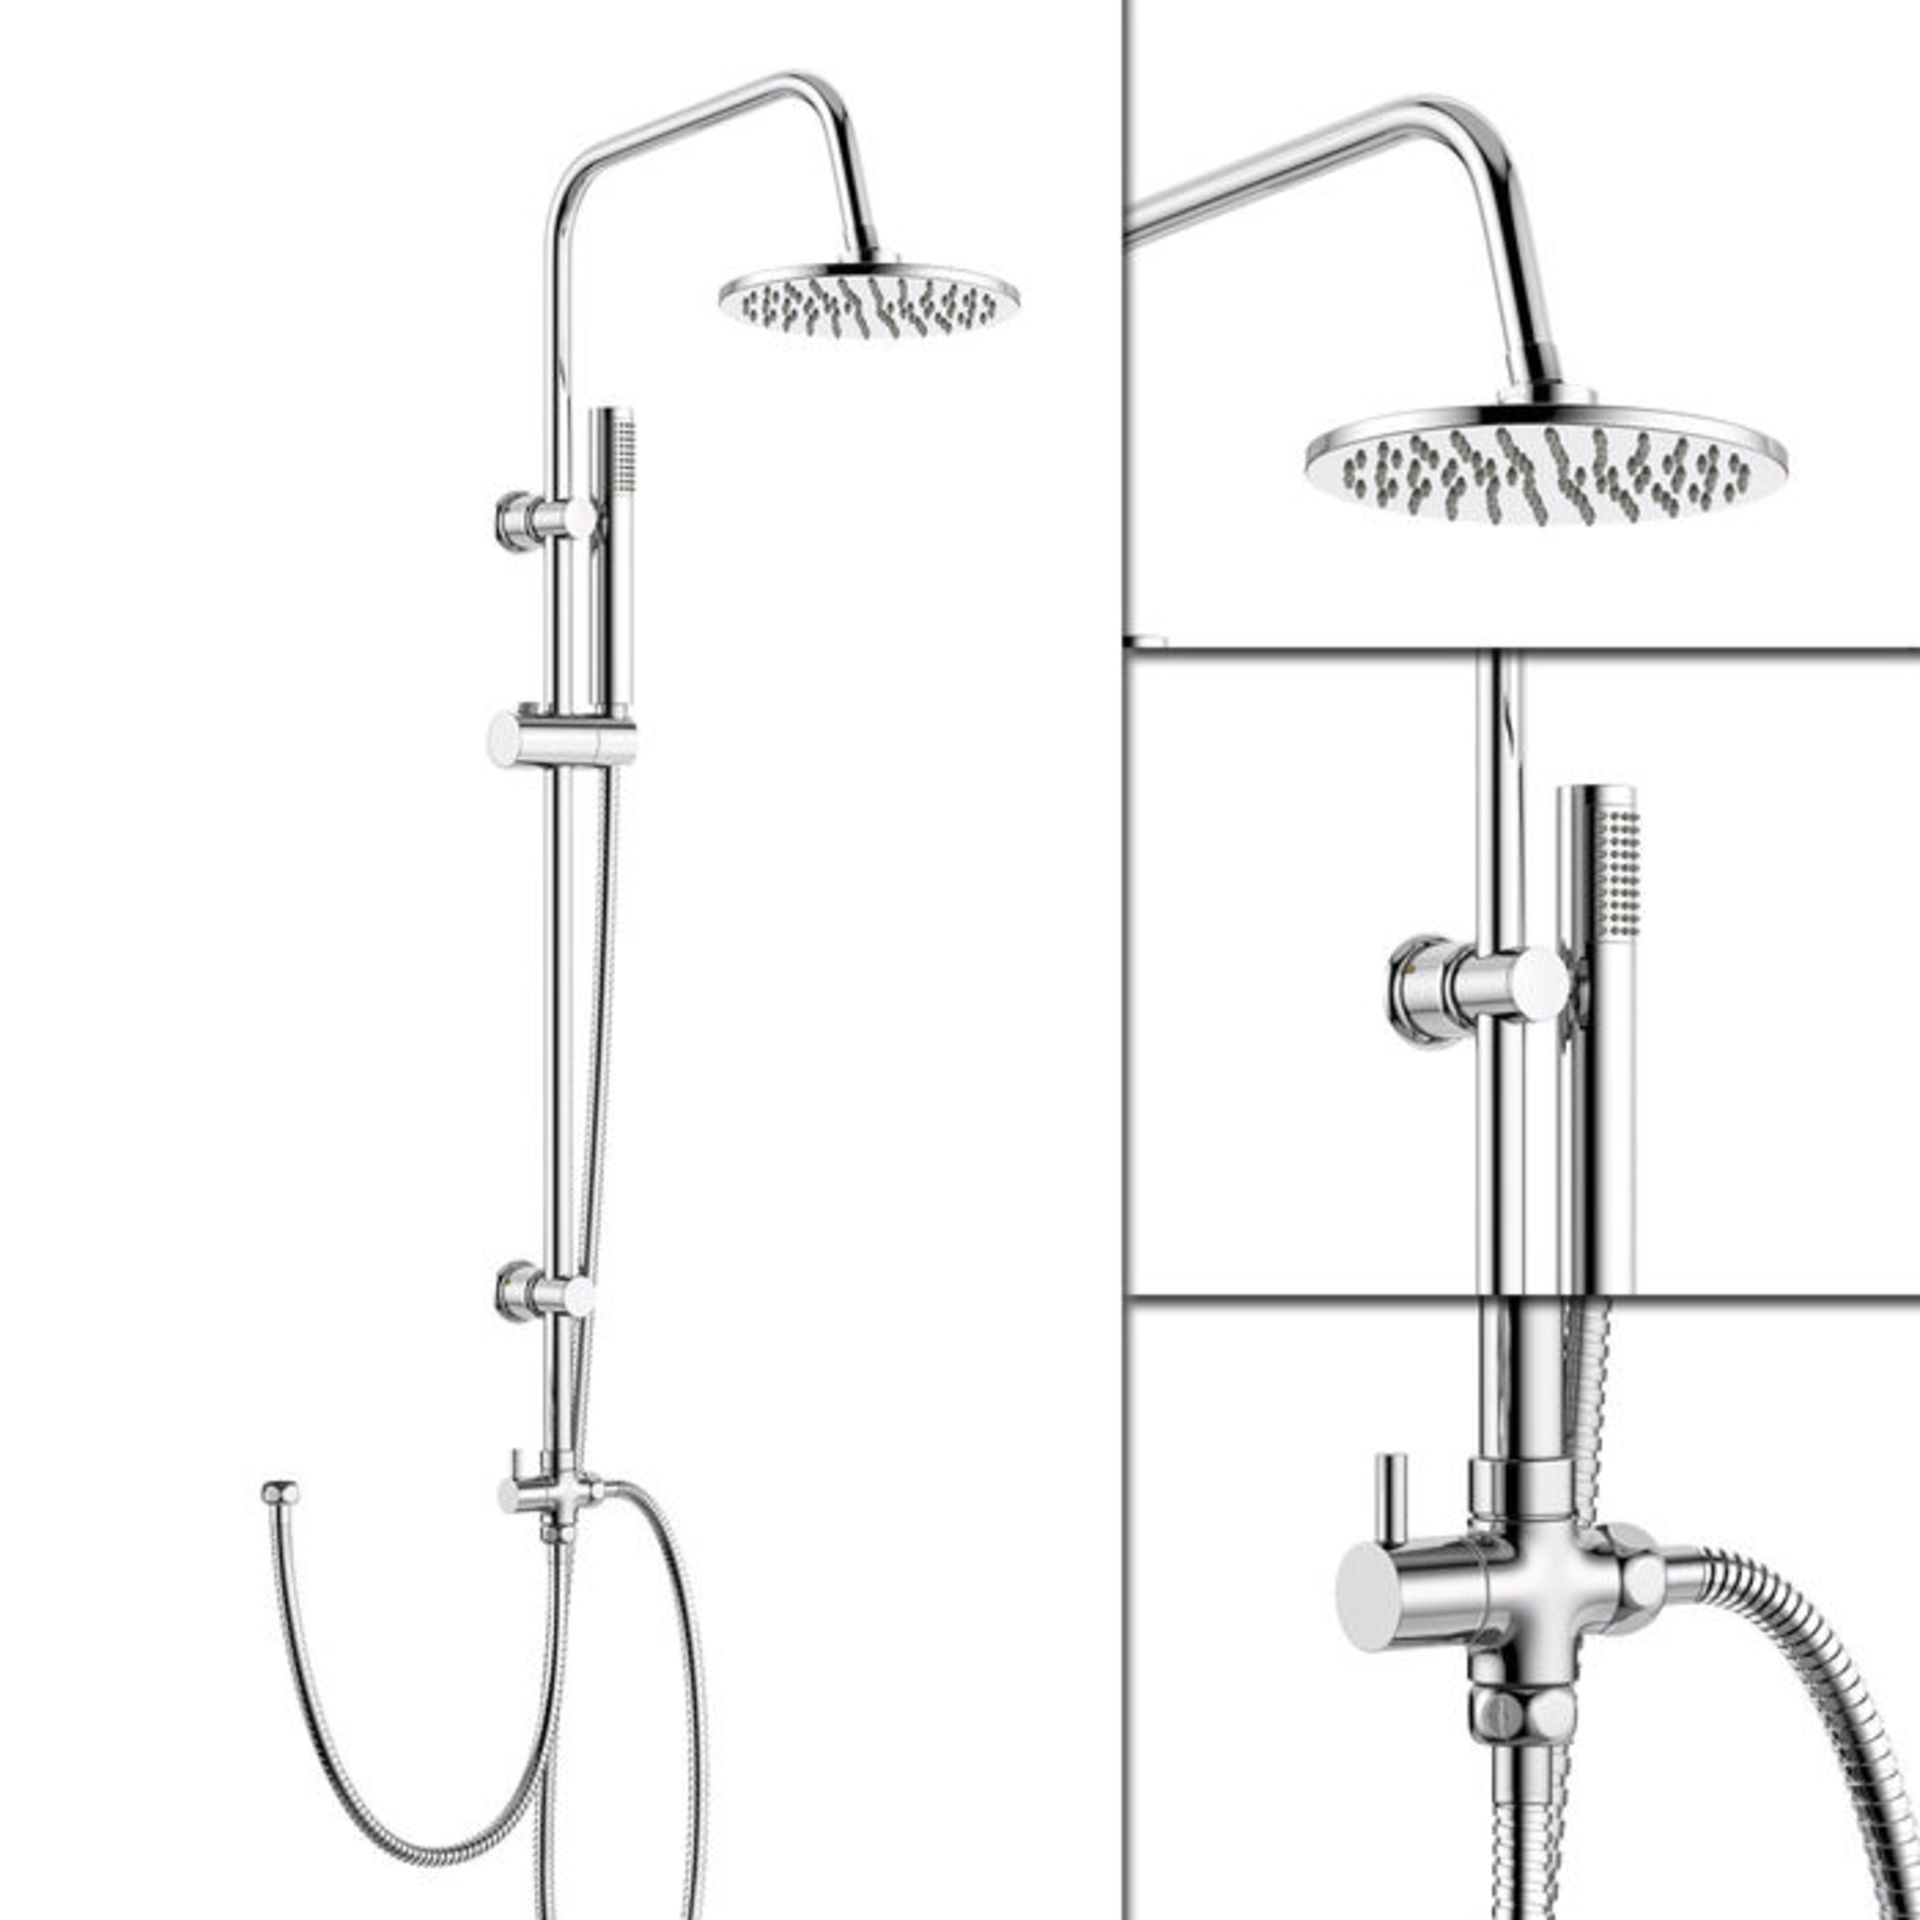 (LU104) 200mm Round Head, Riser Rail & Handheld Kit. Quality stainless steel shower head with Easy - Image 3 of 4